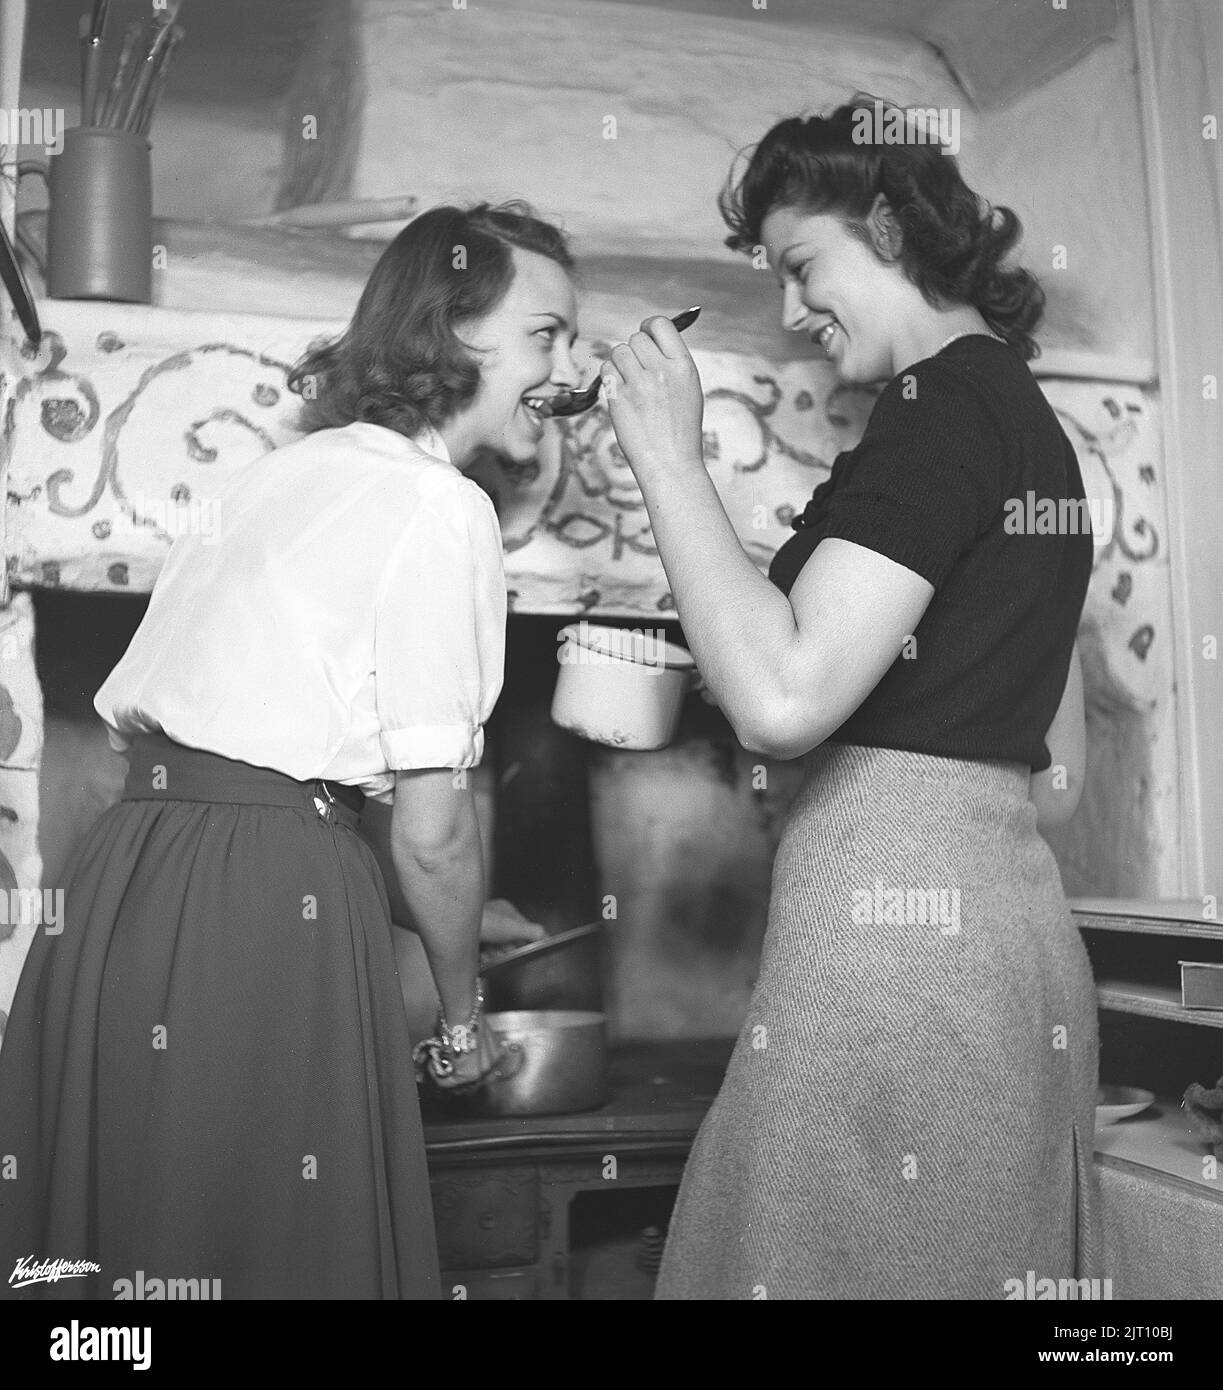 In the kitchen 1940s. Interior of a rural kitchen and two women cooking together, one tasting from the content of a stew on a spoon. Sweden 1945 Kristoffersson ref N143-5 Stock Photo